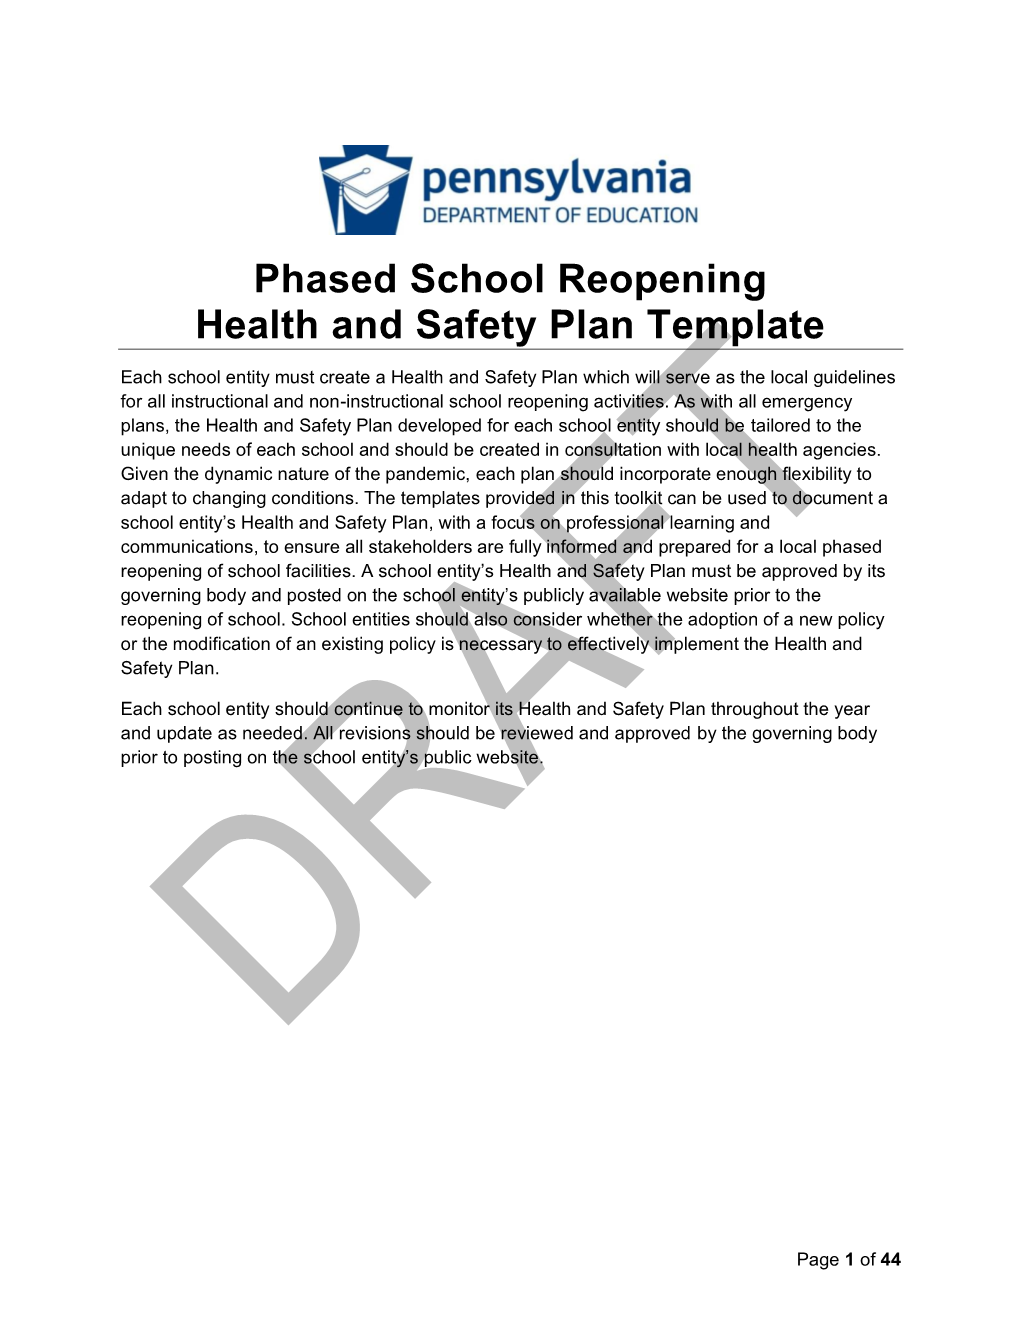 Phased School Reopening Health and Safety Plan Template